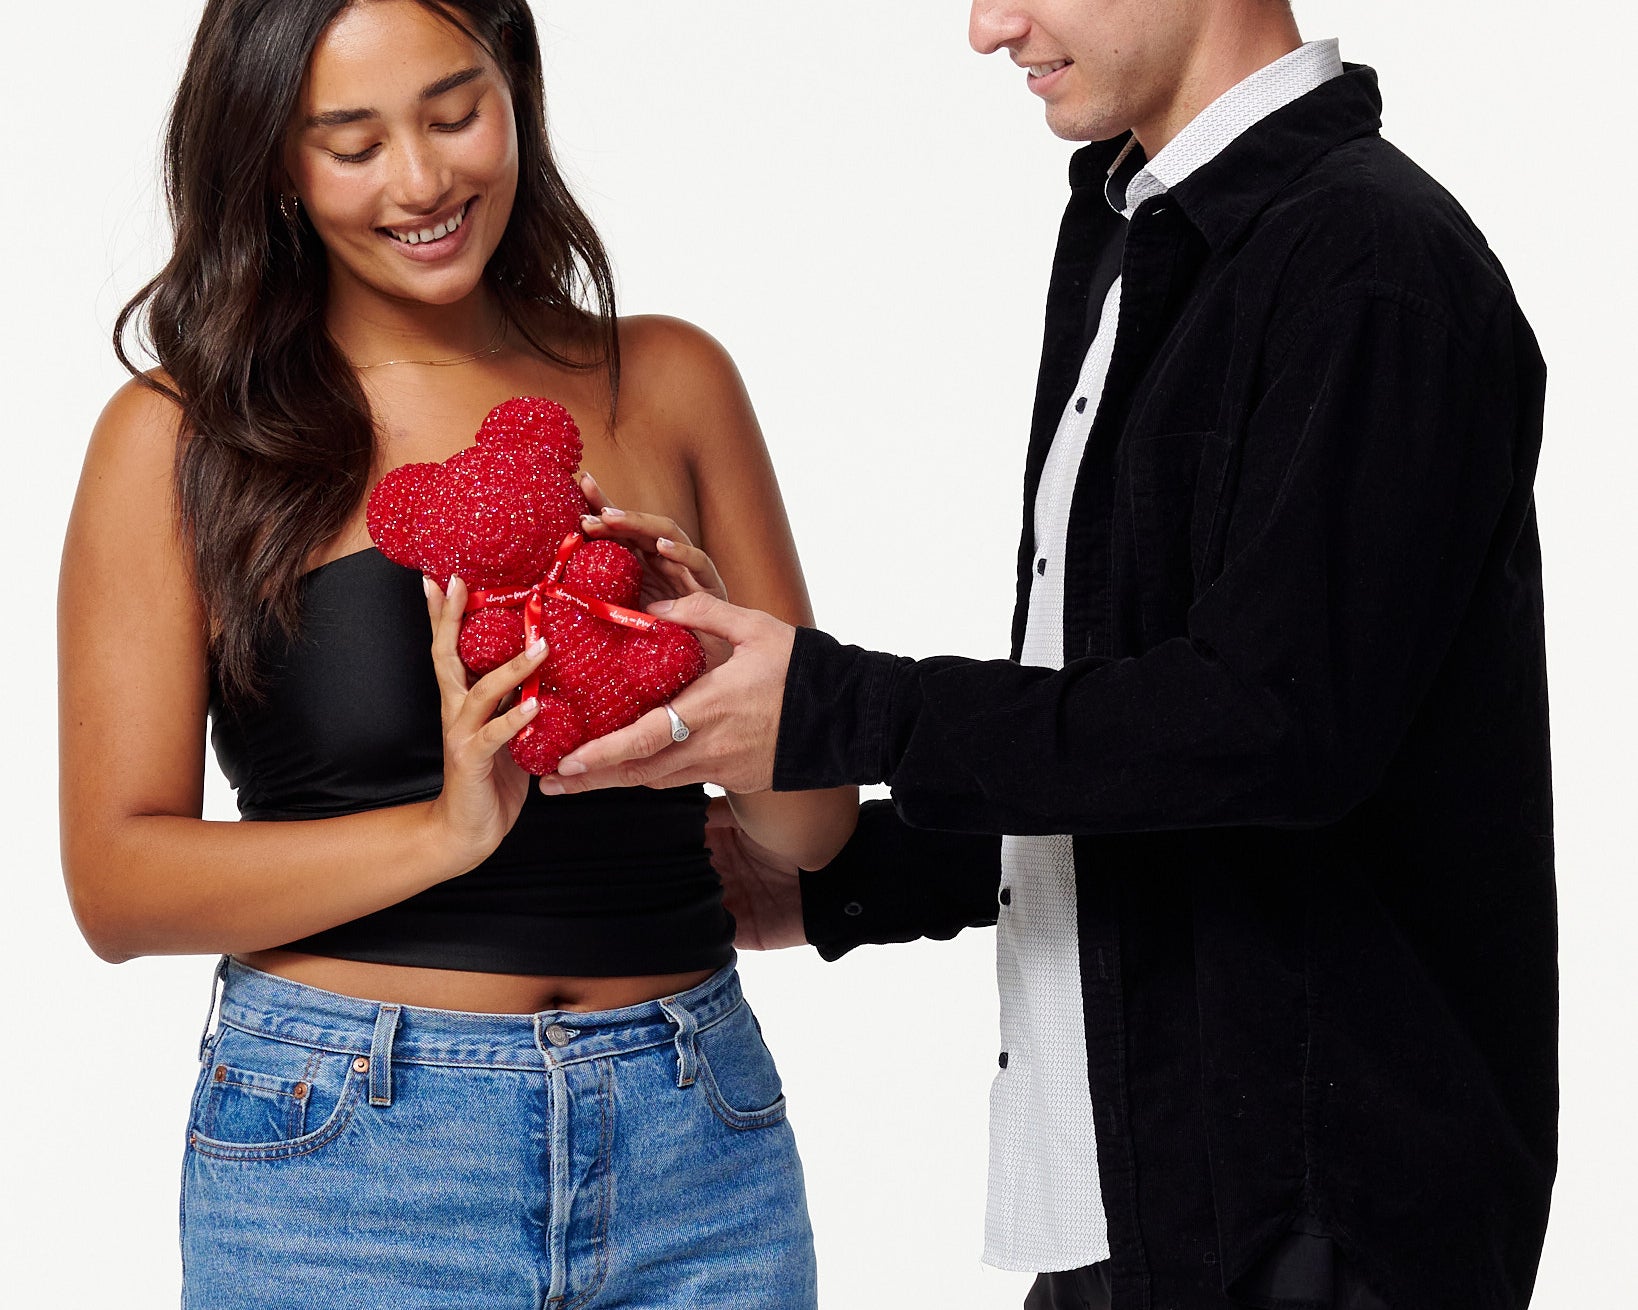  The image shows a woman and a man standing side by side. The woman is to the left, wearing a black cropped top and blue jeans, smiling down at a red, sparkly teddy bear she is holding. The man is to the right, dressed in a black jacket over a white shirt, also looking at the teddy bear with a smile, his hands gently touching the bear. Both individuals appear cheerful and are engaging with the teddy bear in a gentle manner. 